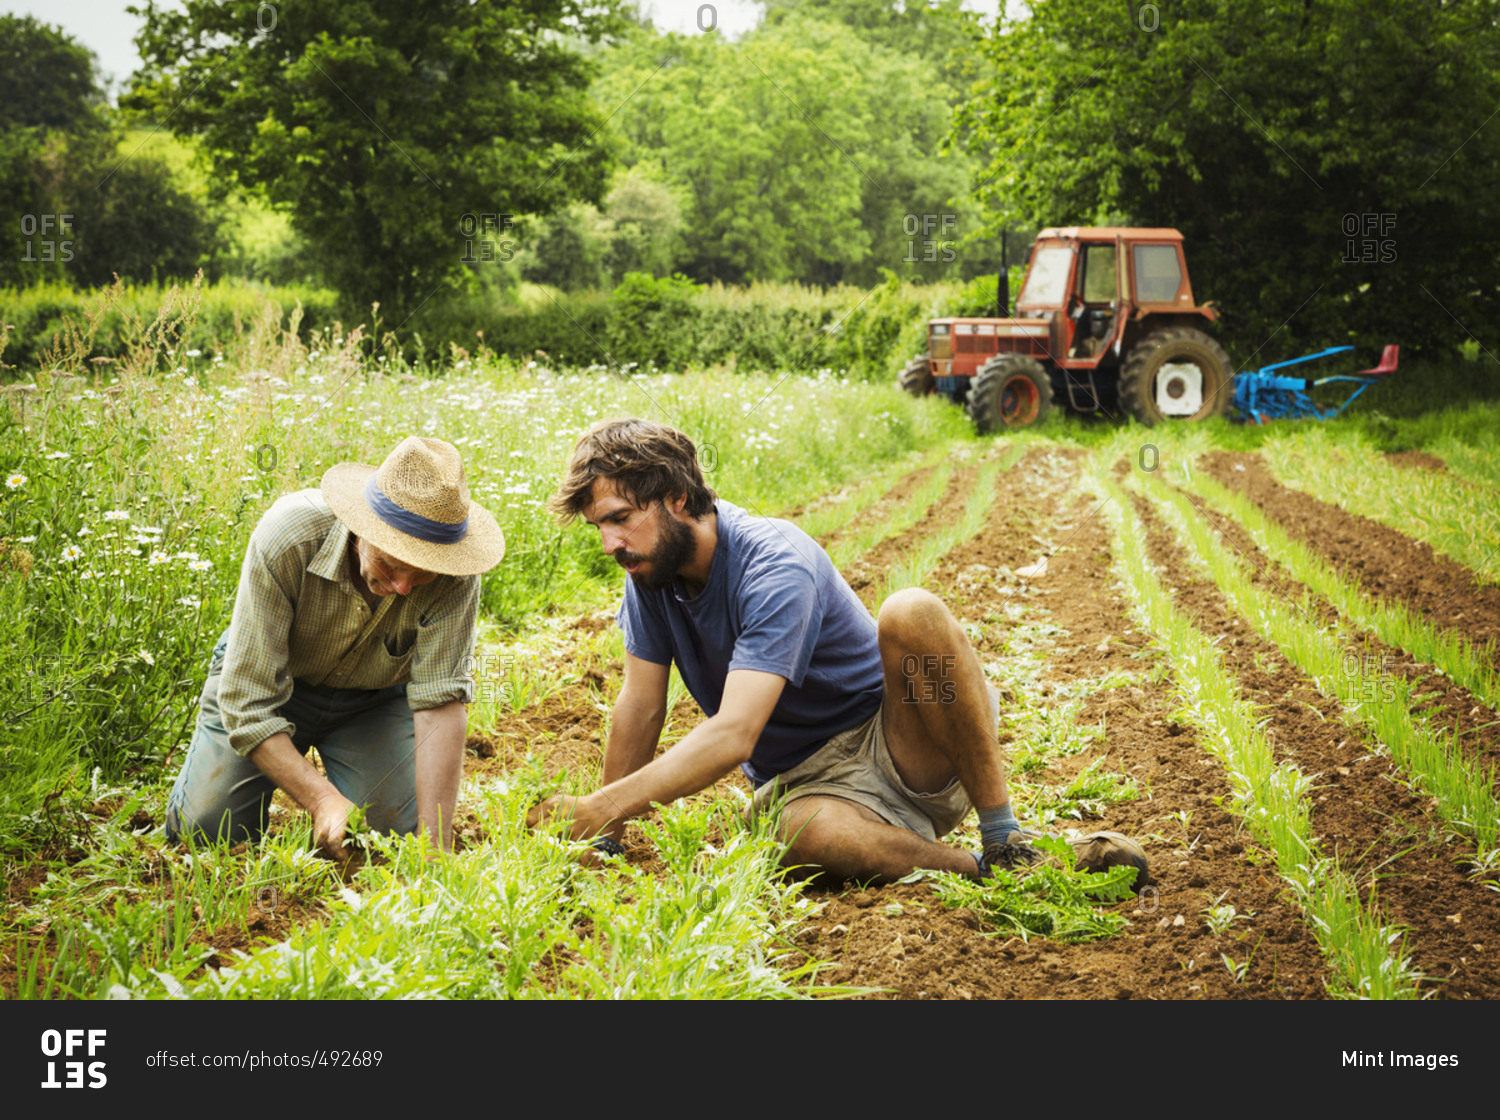 Two men tending rows of small plants in a field.